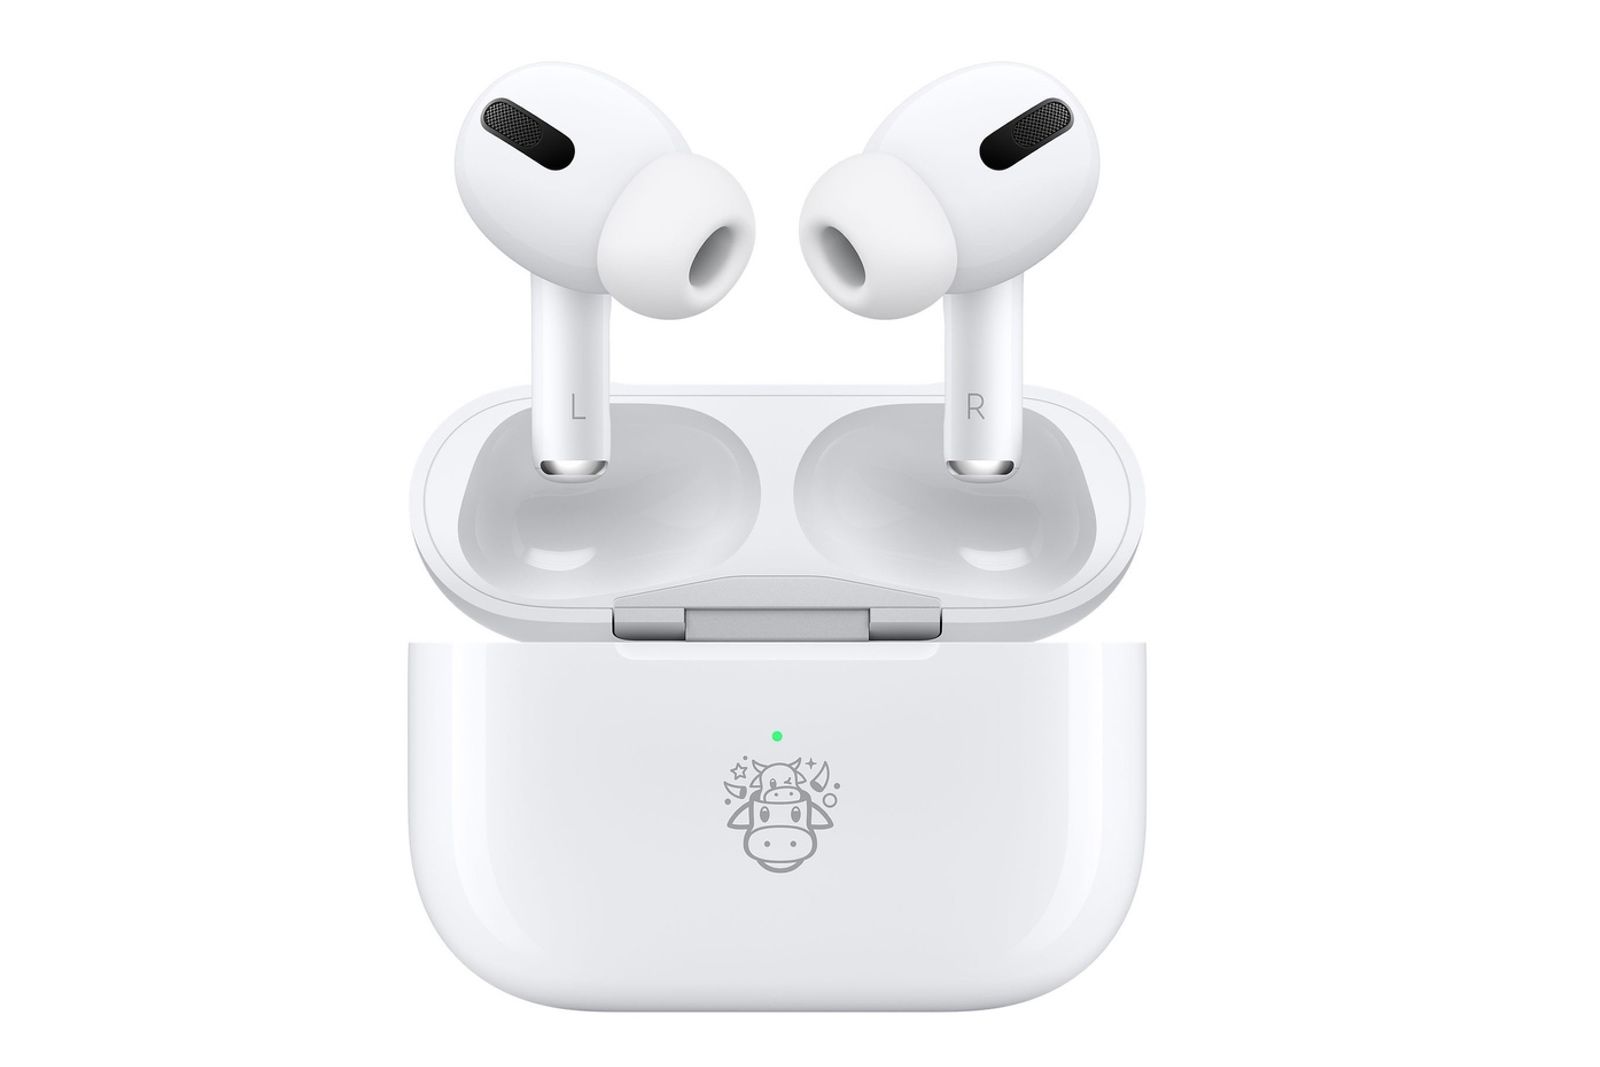 Apple to release limited edition Year of the Ox AirPods Pro